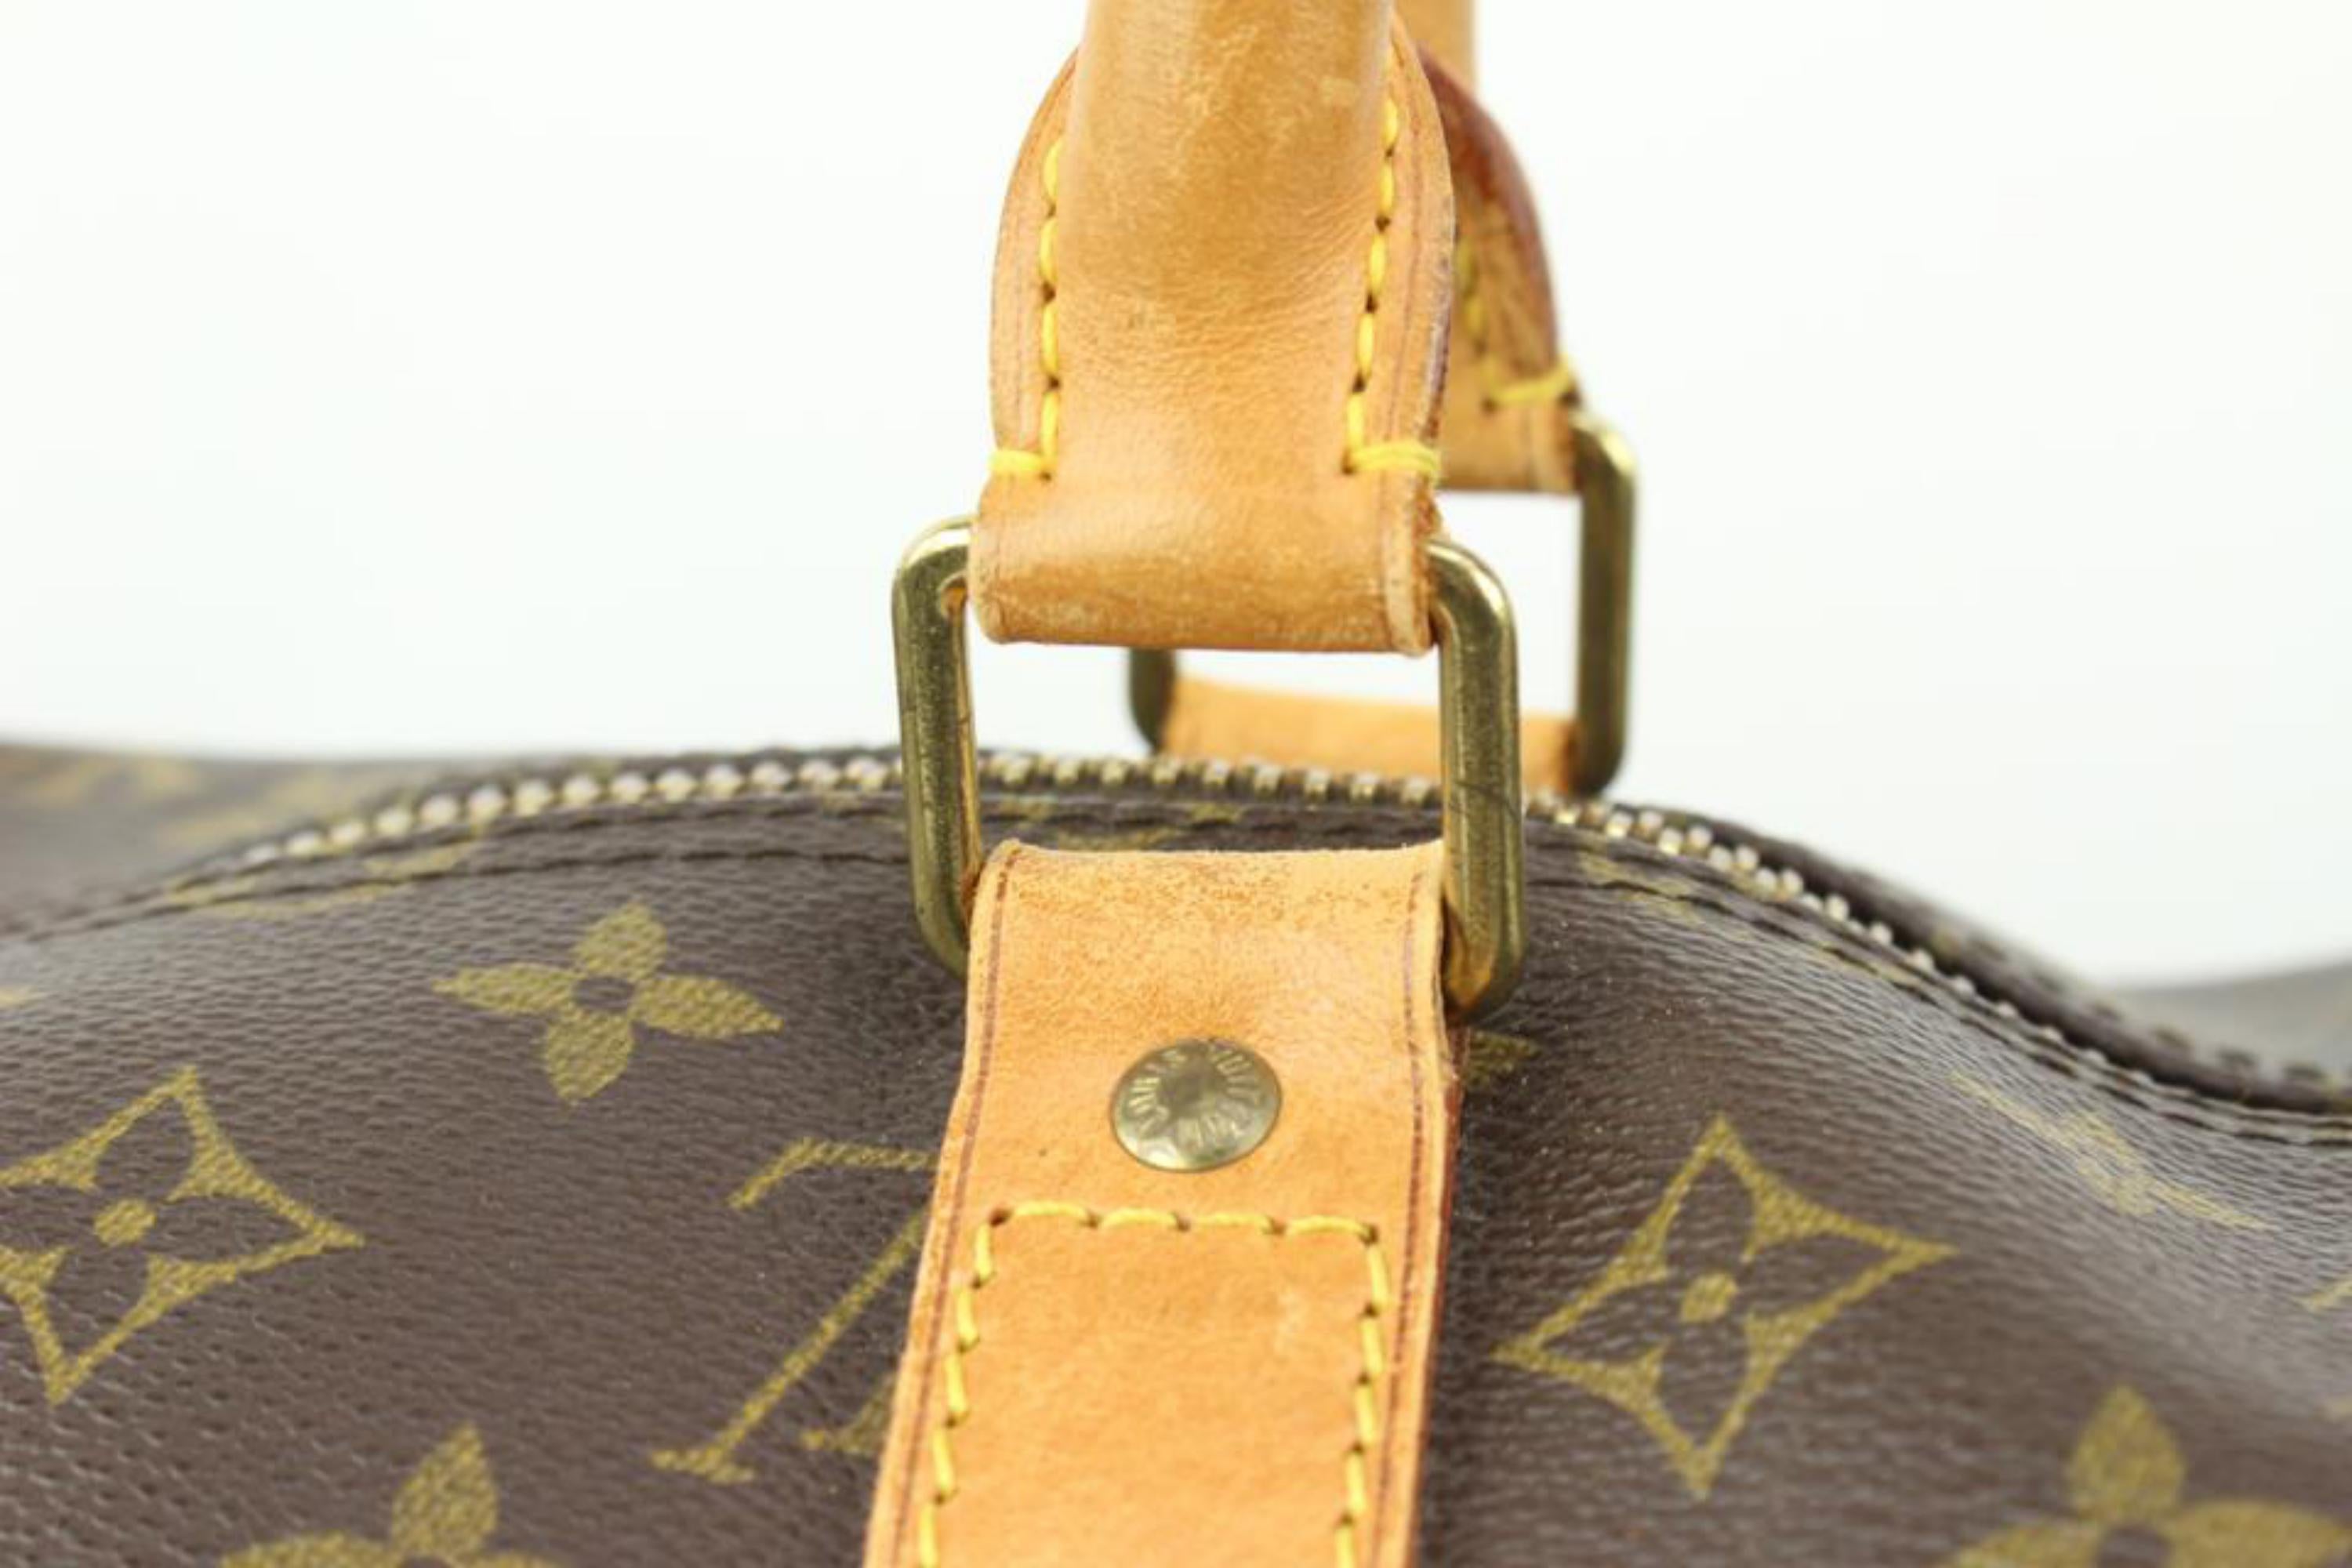 Louis Vuitton Large Monogram Keepall 55 Boston Duffle Bag 36lz420s In Good Condition For Sale In Dix hills, NY